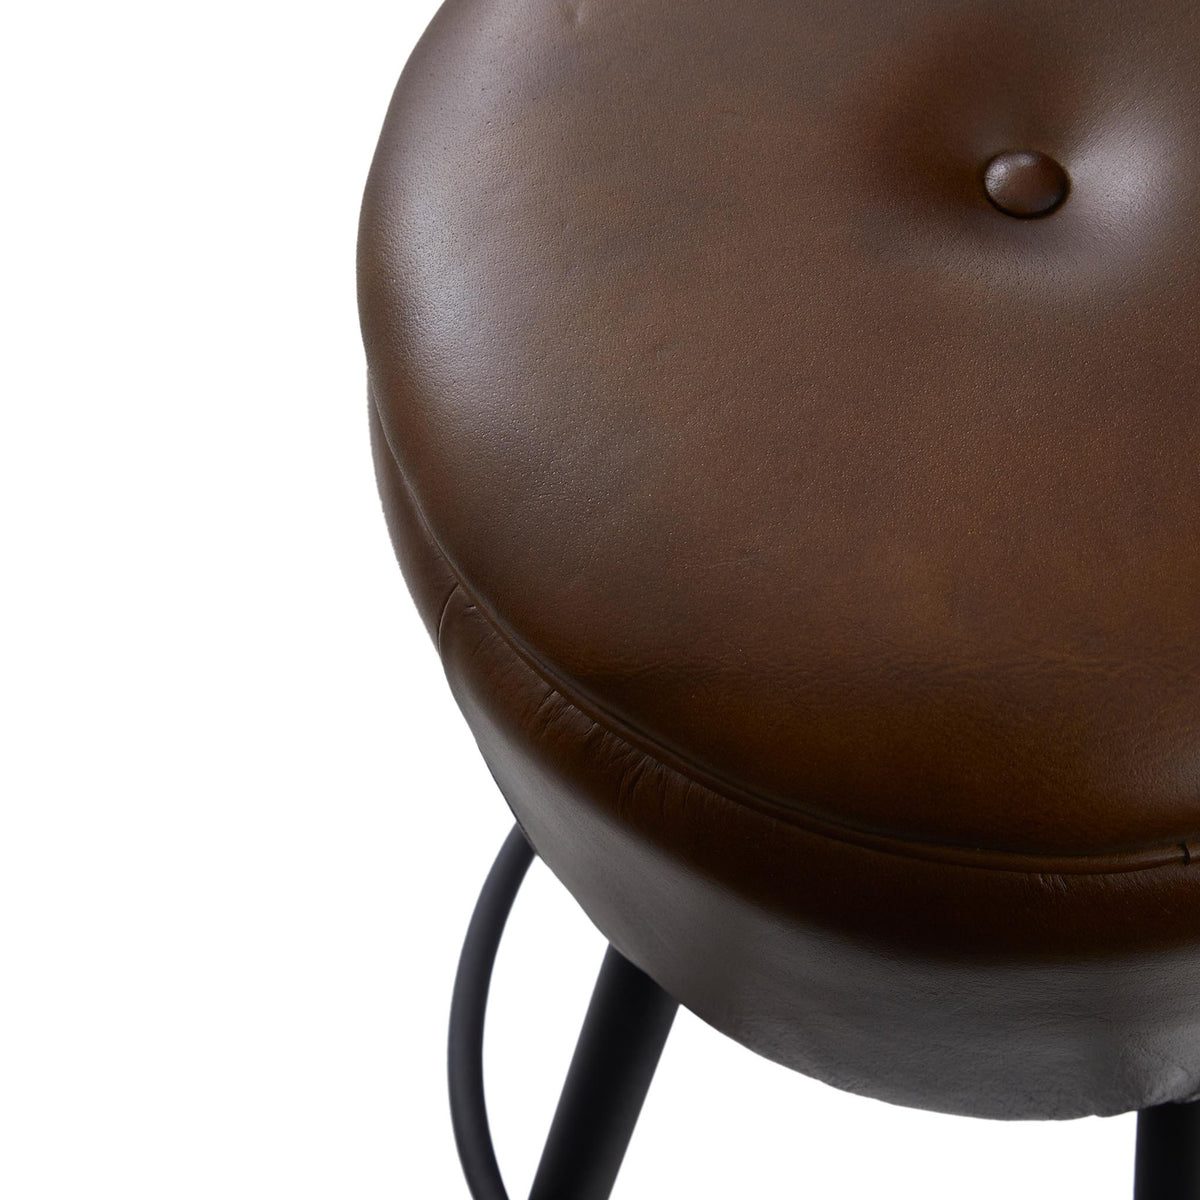 Manta Vintage Brown Round Leather Bar Stool close up of leather seat